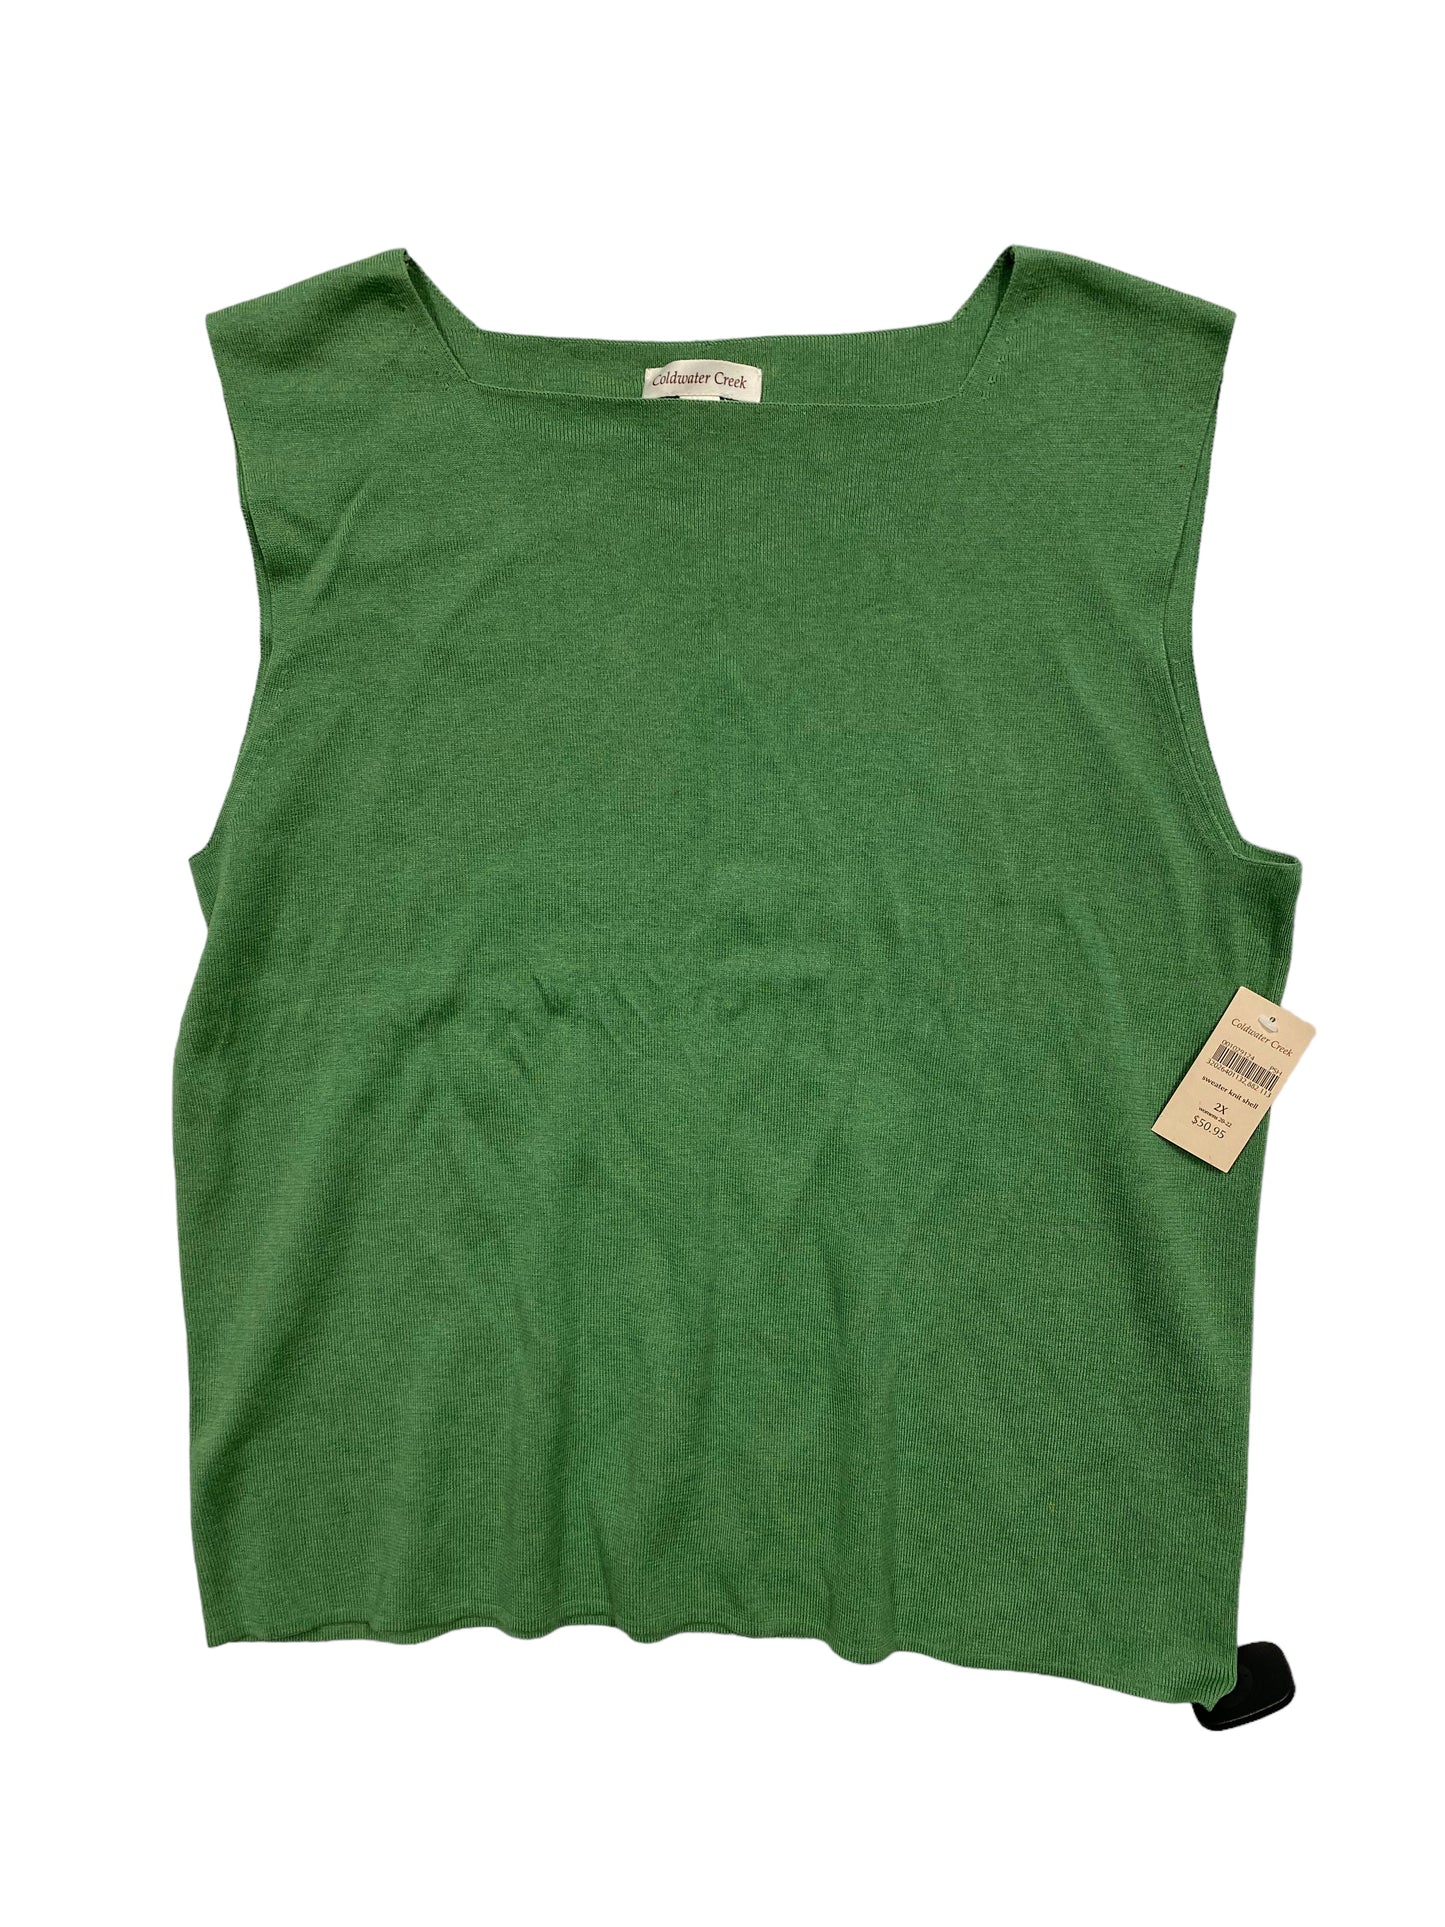 Green Top Sleeveless Coldwater Creek, Size 2x